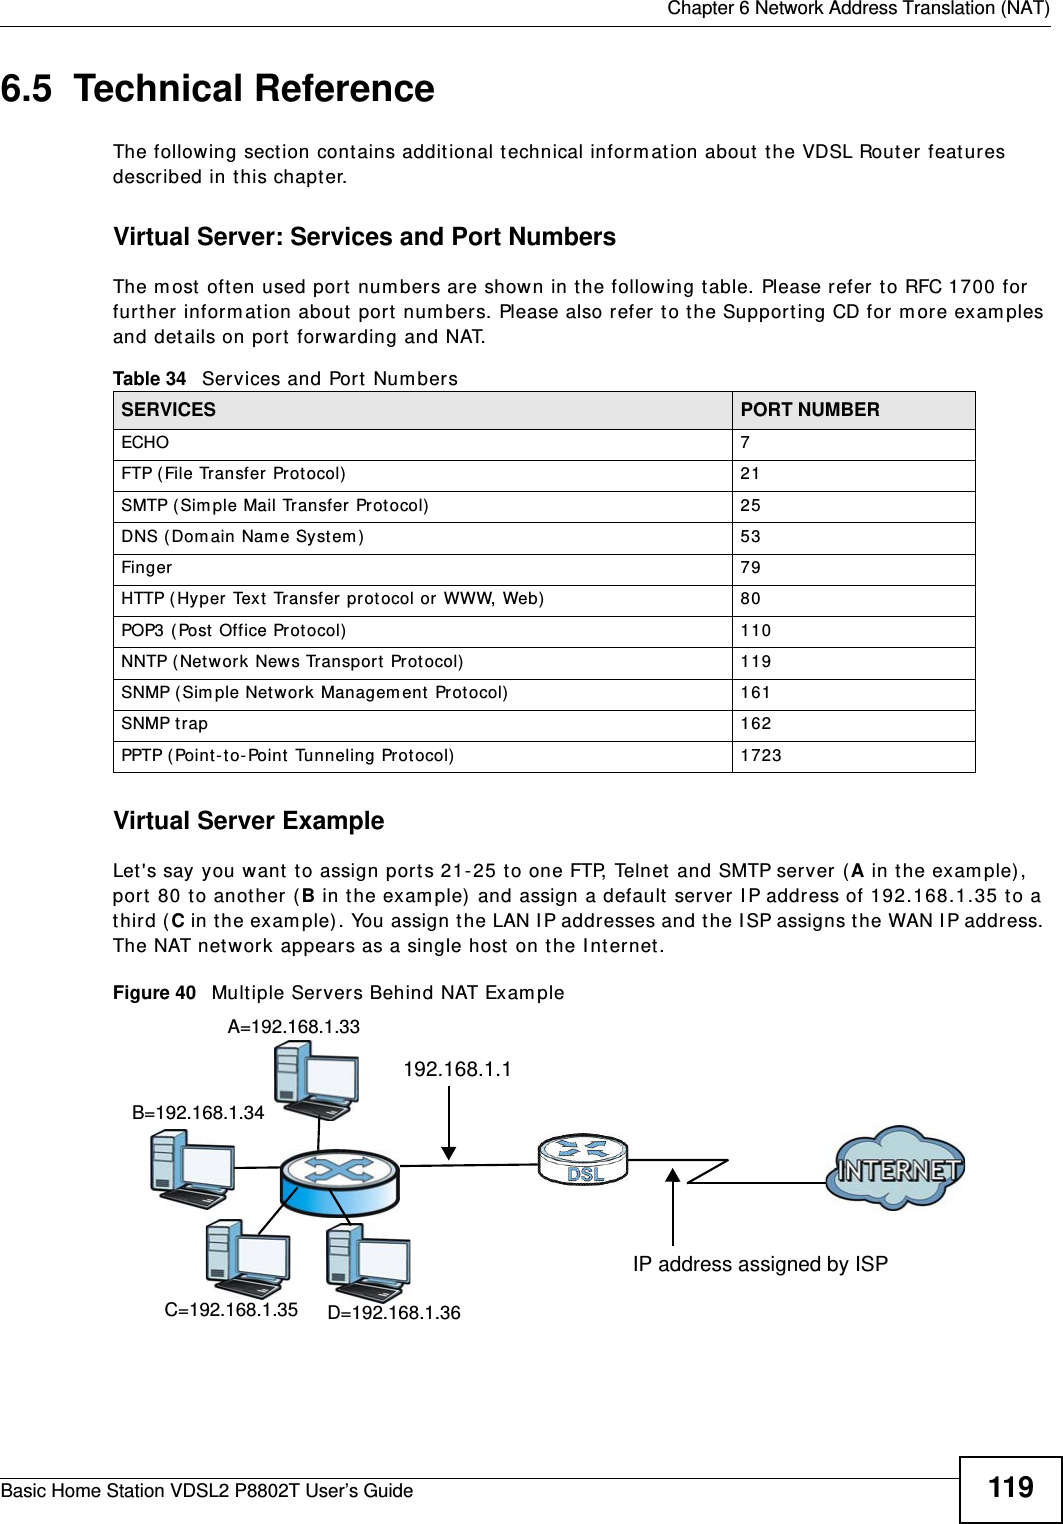  Chapter 6 Network Address Translation (NAT)Basic Home Station VDSL2 P8802T User’s Guide 1196.5  Technical ReferenceThe following sect ion contains addit ional t echnical inform at ion about  the VDSL Router features described in t his chapt er.Virtual Server: Services and Port NumbersThe m ost  oft en used port  num bers are shown in t he following t able. Please refer t o RFC 1700 for further inform ation about port  num bers. Please also refer t o t he Support ing CD for m ore exam ples and det ails on port forwarding and NAT.Virtual Server ExampleLet &apos;s say you want  to assign ports 21- 25 t o one FTP, Telnet  and SMTP server (A in t he exam ple) , port  80 t o another ( B in t he exam ple)  and assign a default server I P address of 192.168.1.35 t o a third ( C in t he exam ple) . You assign t he LAN I P addresses and the I SP assigns the WAN I P address. The NAT net work appears as a single host  on t he I nt ernet .Figure 40   Multiple Server s Behind NAT Exam pleTable 34   Services and Port Num bersSERVICES PORT NUMBERECHO 7FTP ( File Transfer  Prot ocol) 21SMTP ( Sim ple Mail Transfer Protocol) 25DNS ( Dom ain Nam e Syst em ) 53Finger 79HTTP ( Hy per Text  Transfer prot ocol or  WWW, Web) 80POP3 (Post  Office Prot ocol) 110NNTP (Net work News Transpor t Prot ocol) 119SNMP (Sim ple Network  Managem ent Protocol) 161SNMP trap 162PPTP (Point-t o- Point  Tunneling Prot ocol) 1723D=192.168.1.36192.168.1.1IP address assigned by ISPA=192.168.1.33B=192.168.1.34C=192.168.1.35